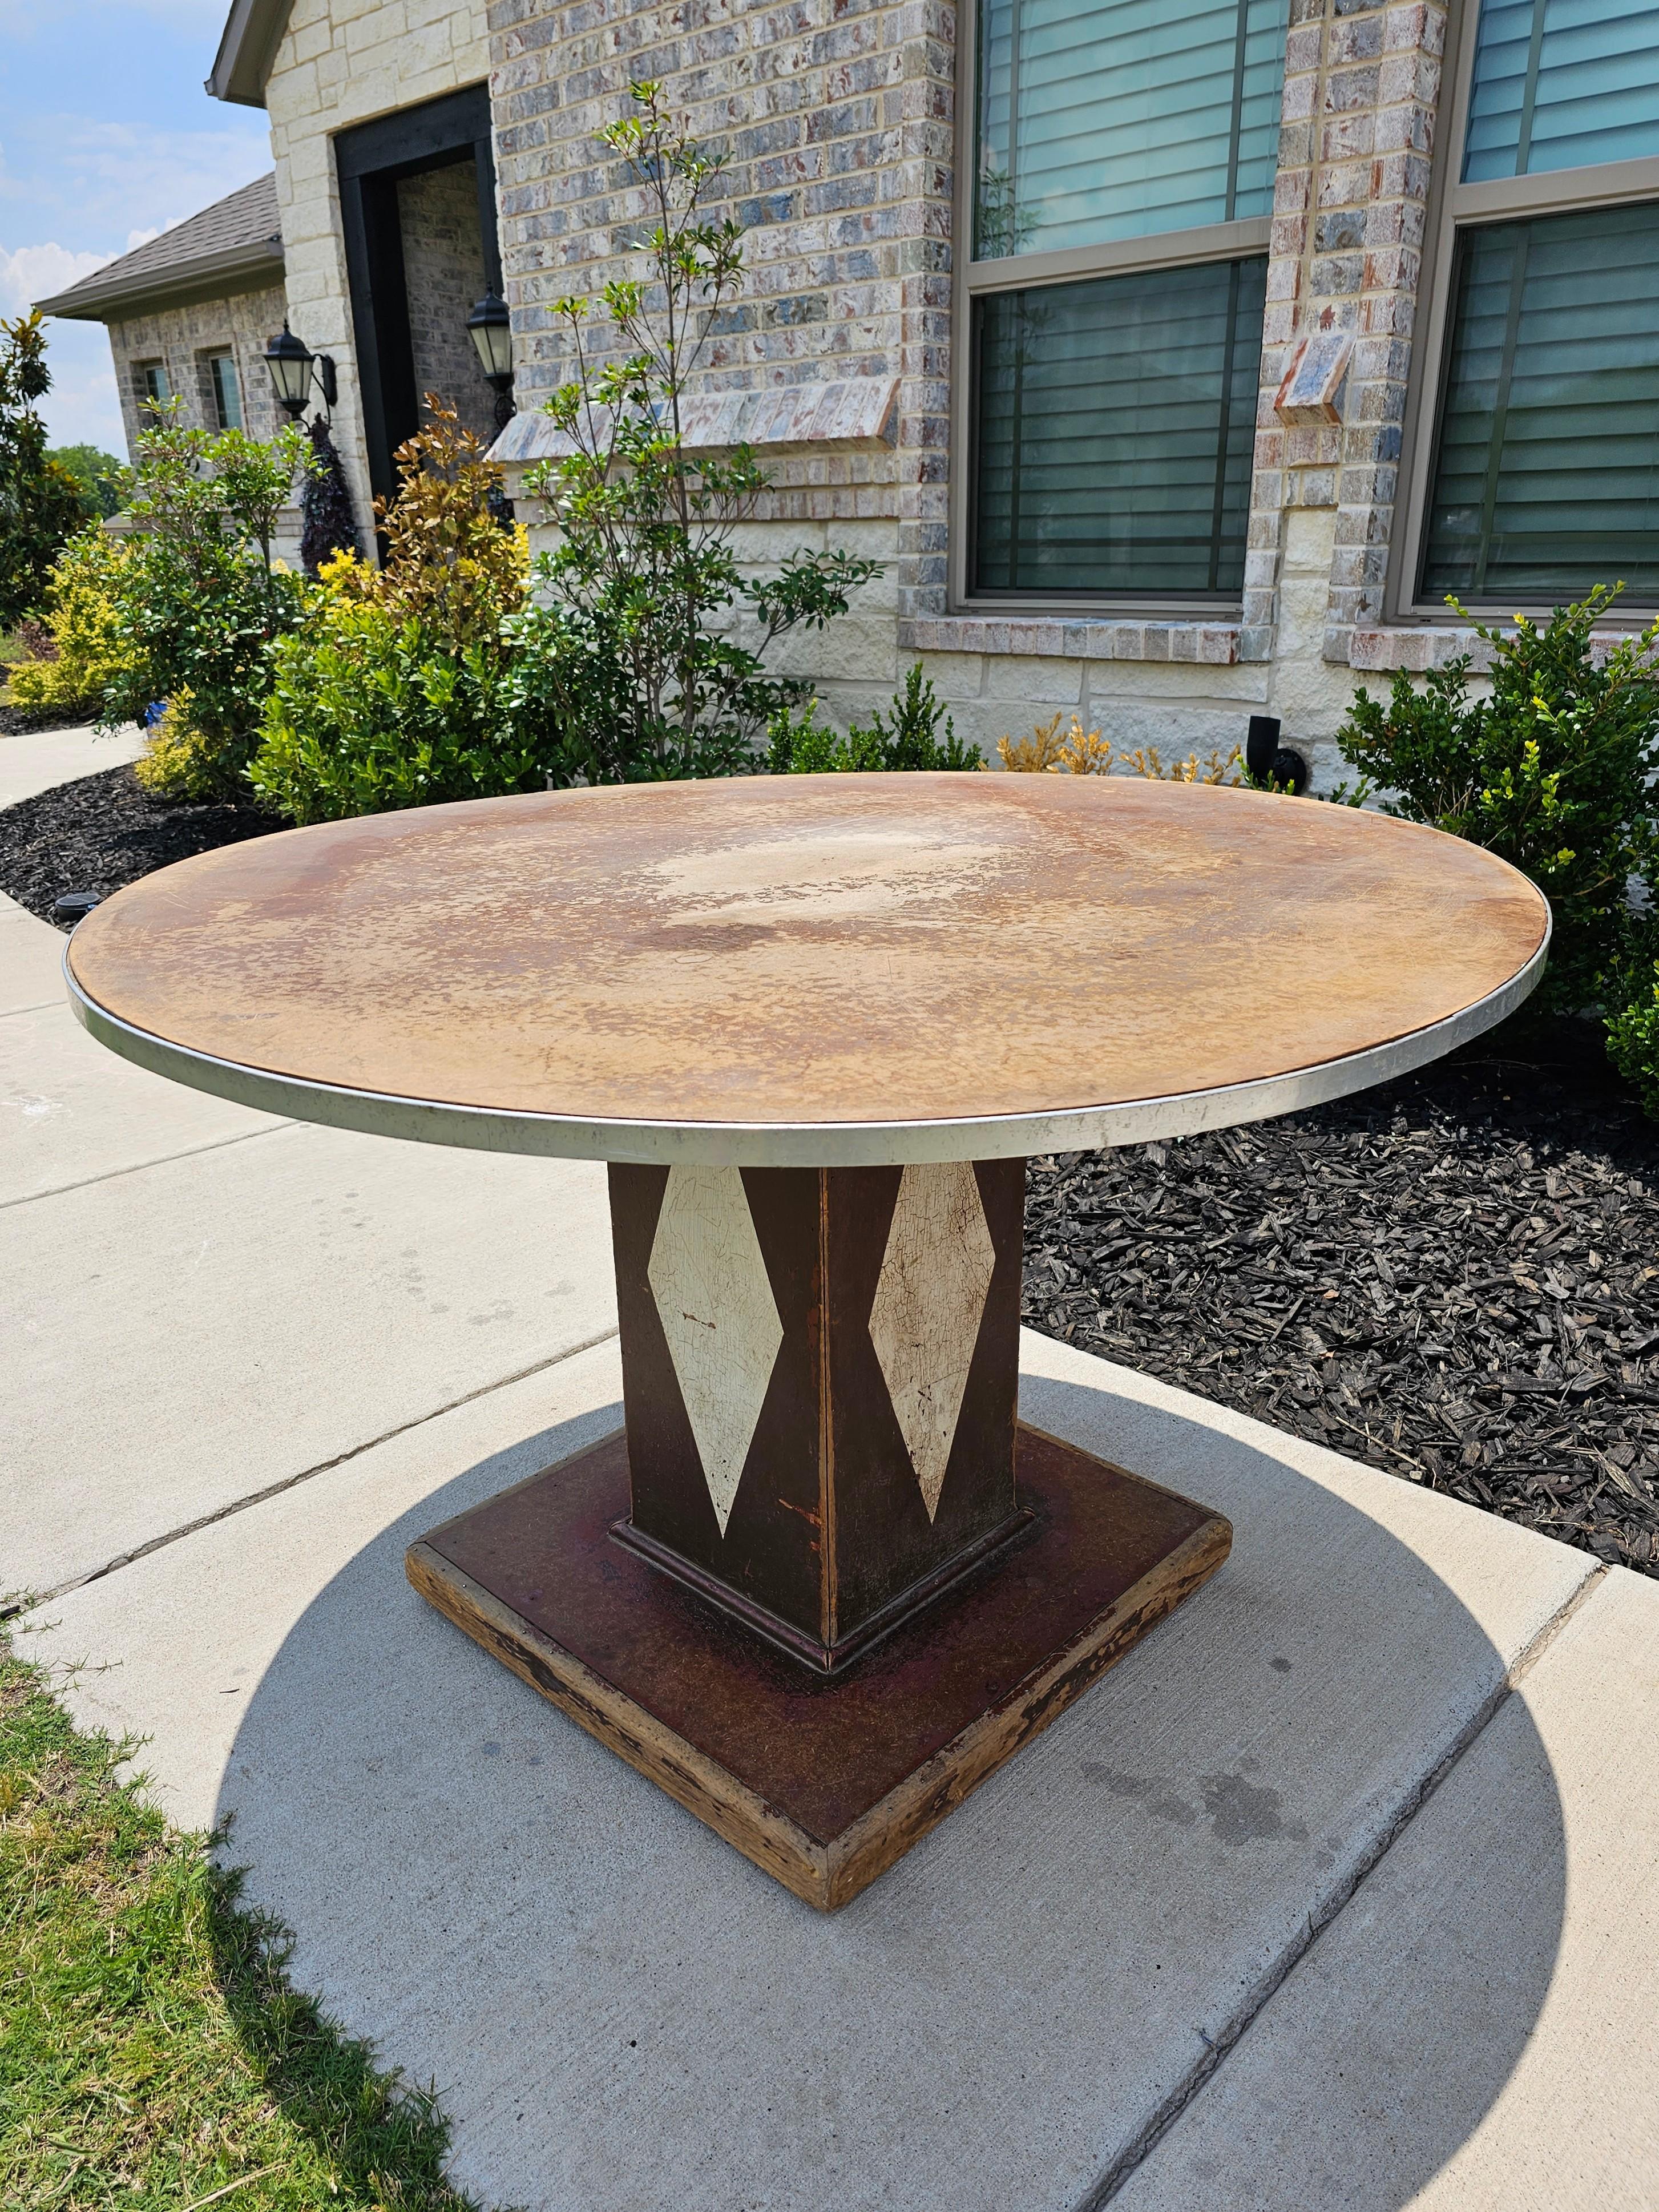 A fabulous Art Deco era industrial department store round display table. circa 1930s

Having a circular top with metal rim, rising on wooden pedestal support with painted diamond accents, atop sturdy square plinth base. 

Dimensions: